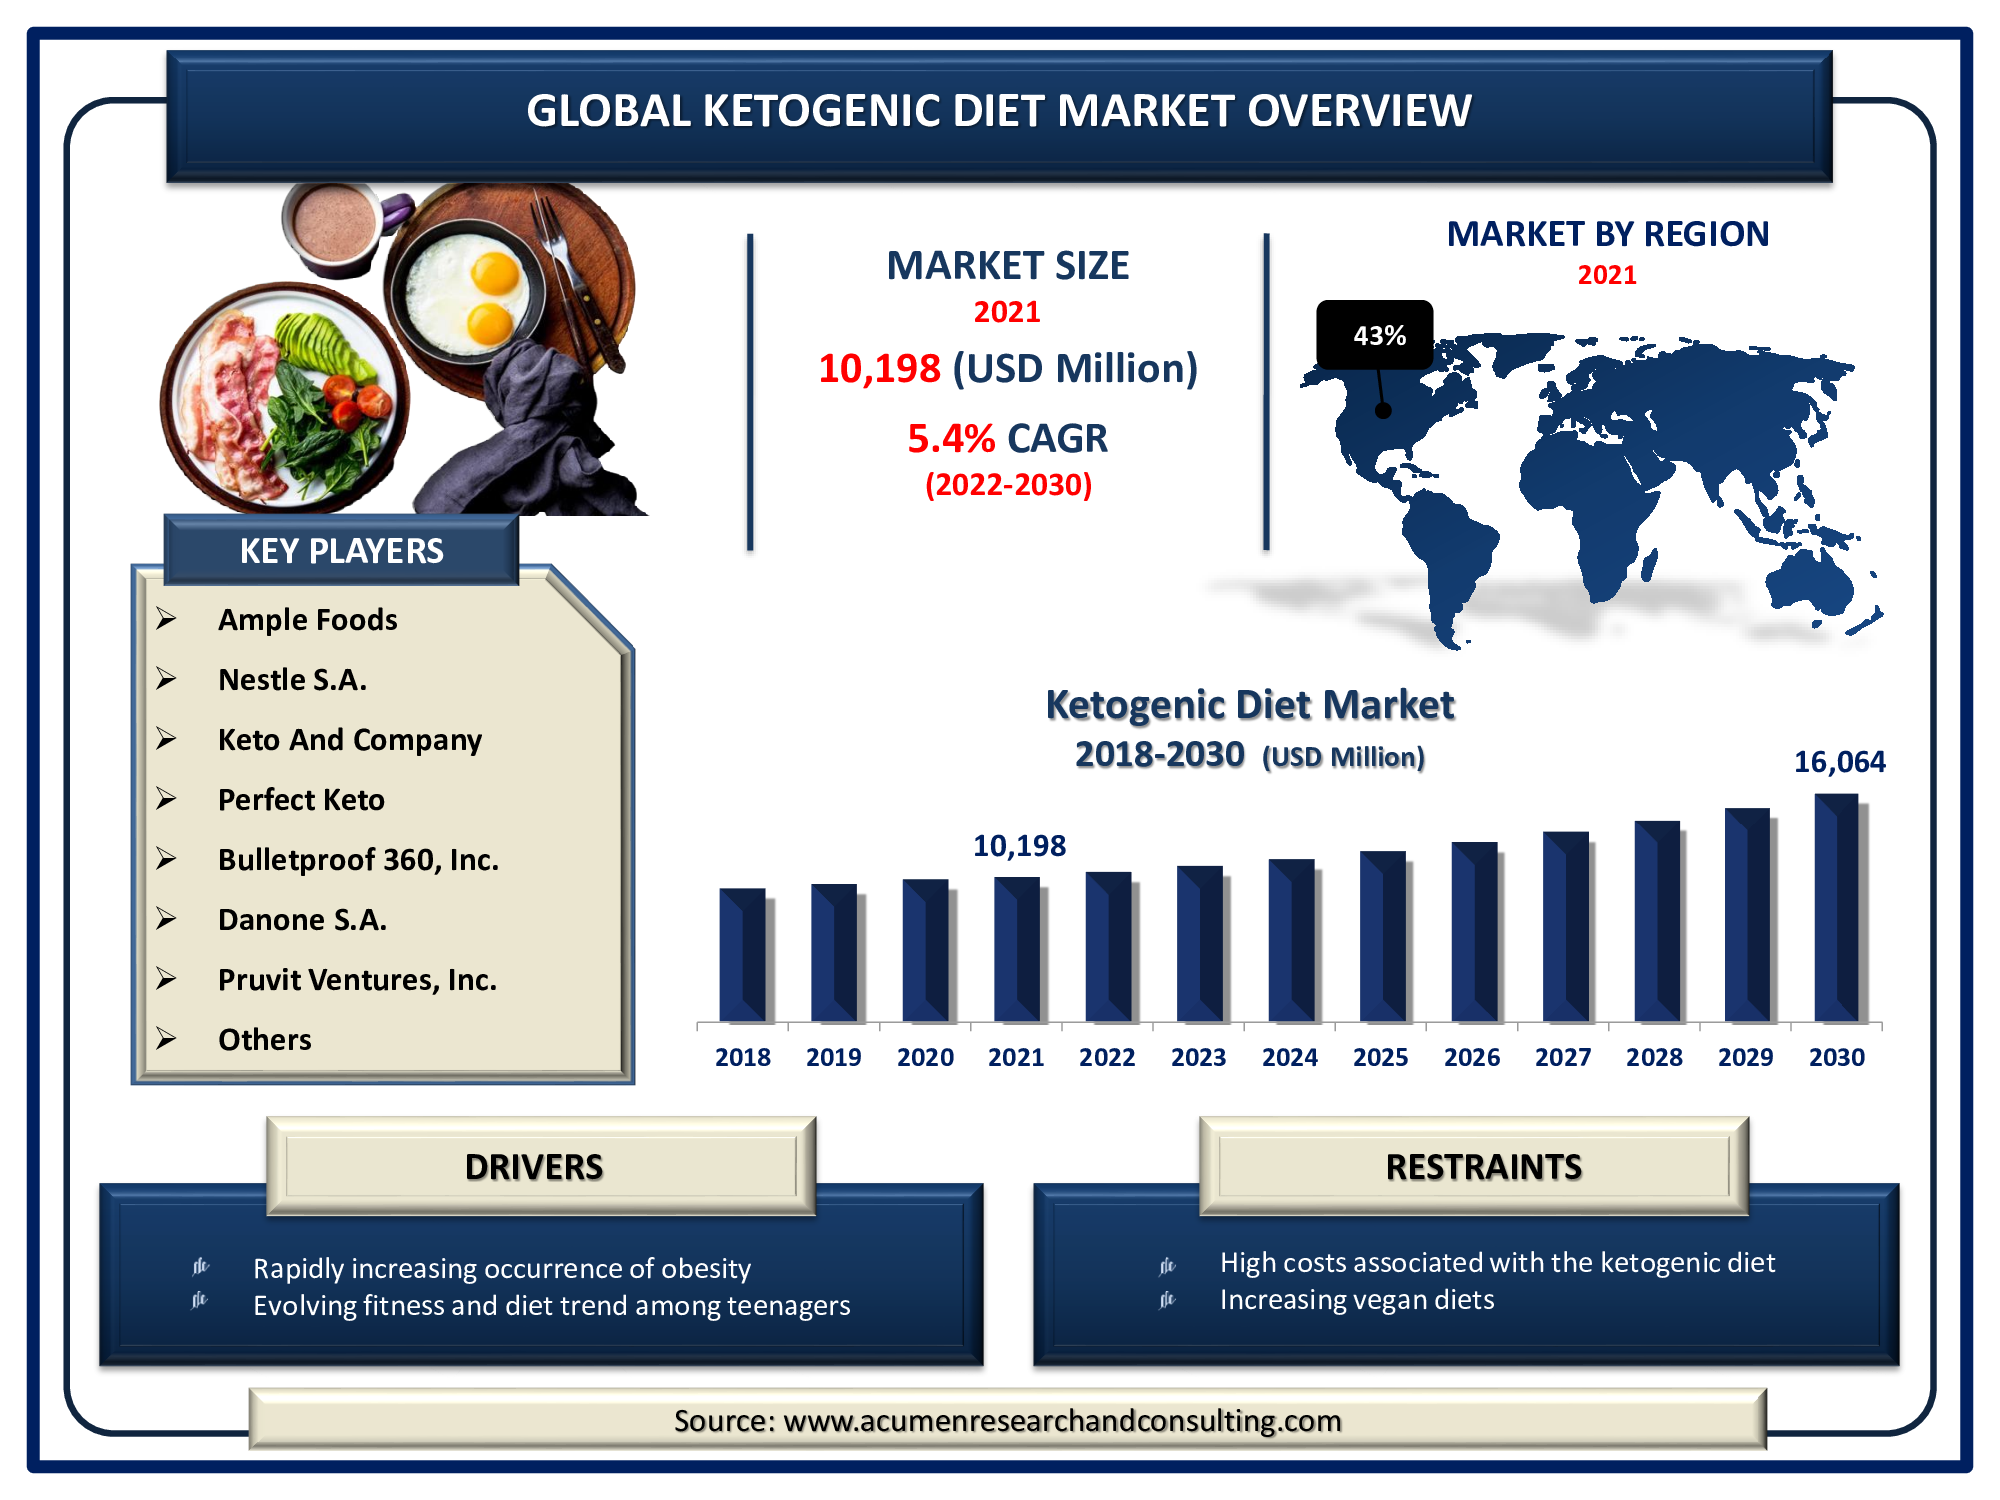 Ketogenic Diet Market Size was valued at USD 10,198 Million in 2021 and is predicted to be worth USD 16,064 Million by 2030, with a CAGR of 5.4% from 2022 to 2030.